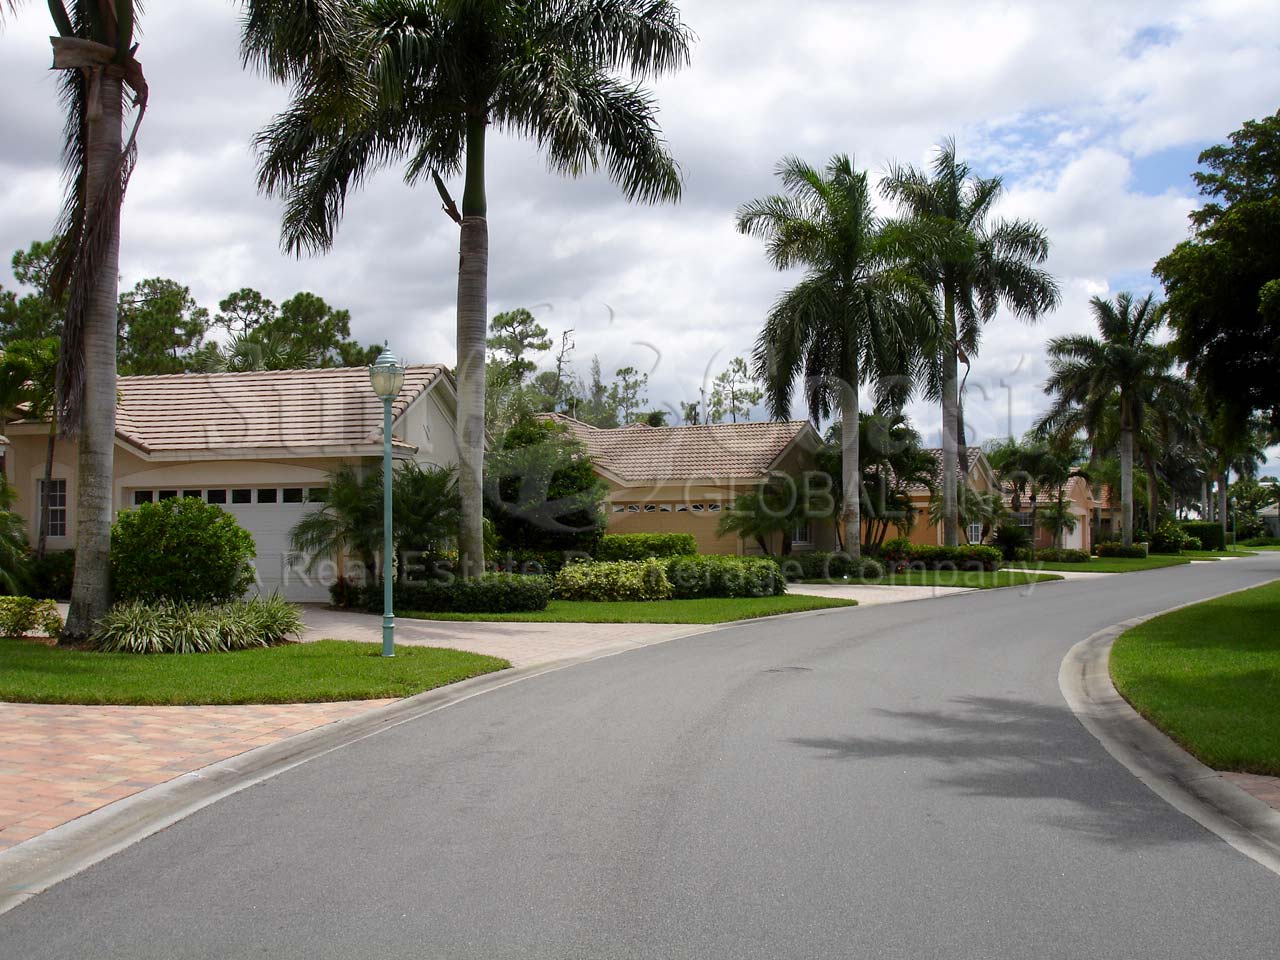 Cypress Pointe Preserve neighborhood of single family homes with stamped or pavered driveways and 2 car garages